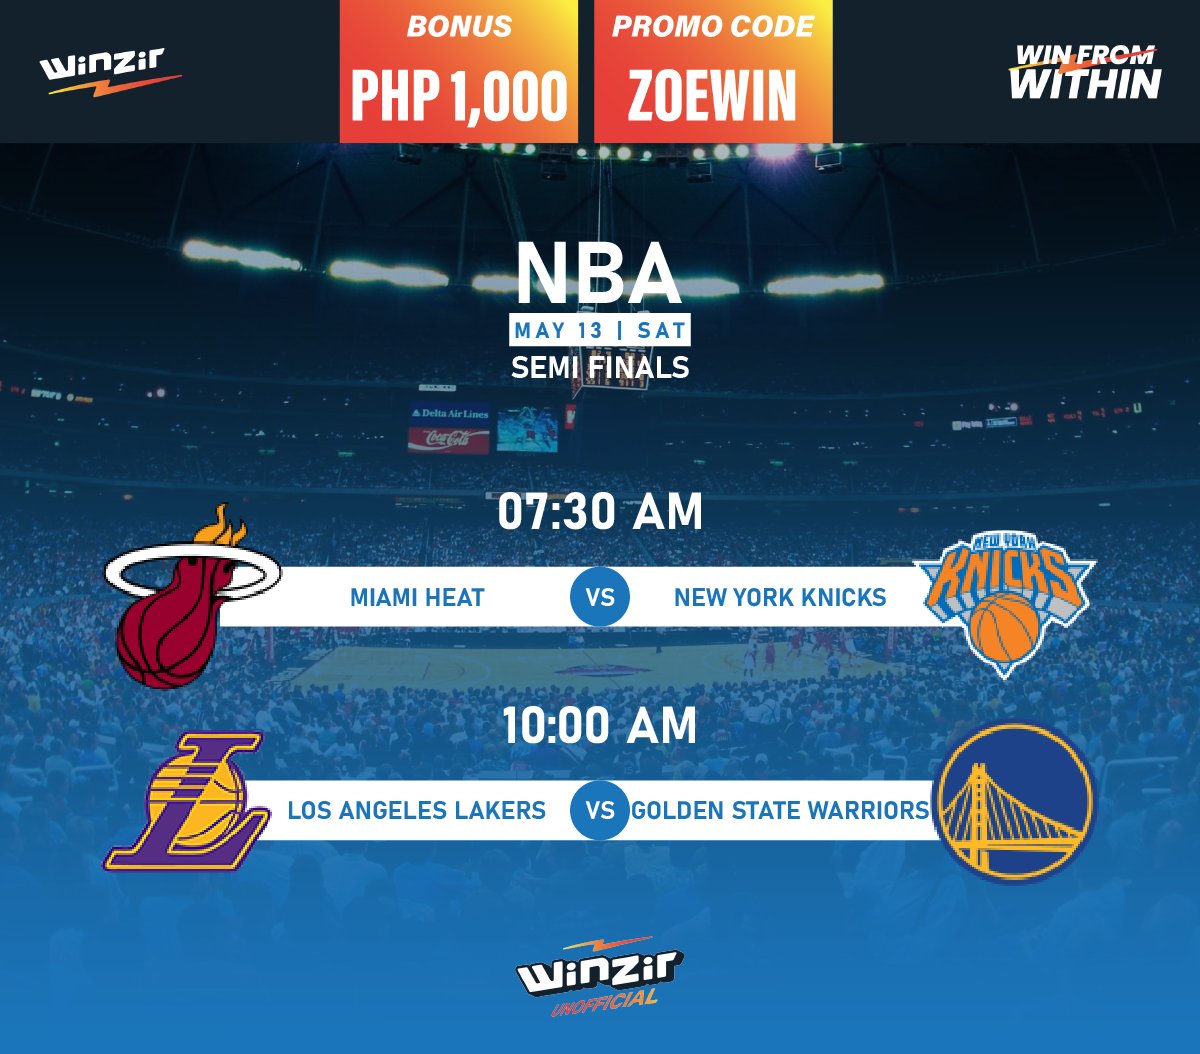 NBA 2023 Playoffs: Golden State Warriors vs. Los Angeles Lakers, Miami Heat vs New York Knicks

Bet on your favourite sports and games at Winzir licensed by PAGCOR, using this promo code 